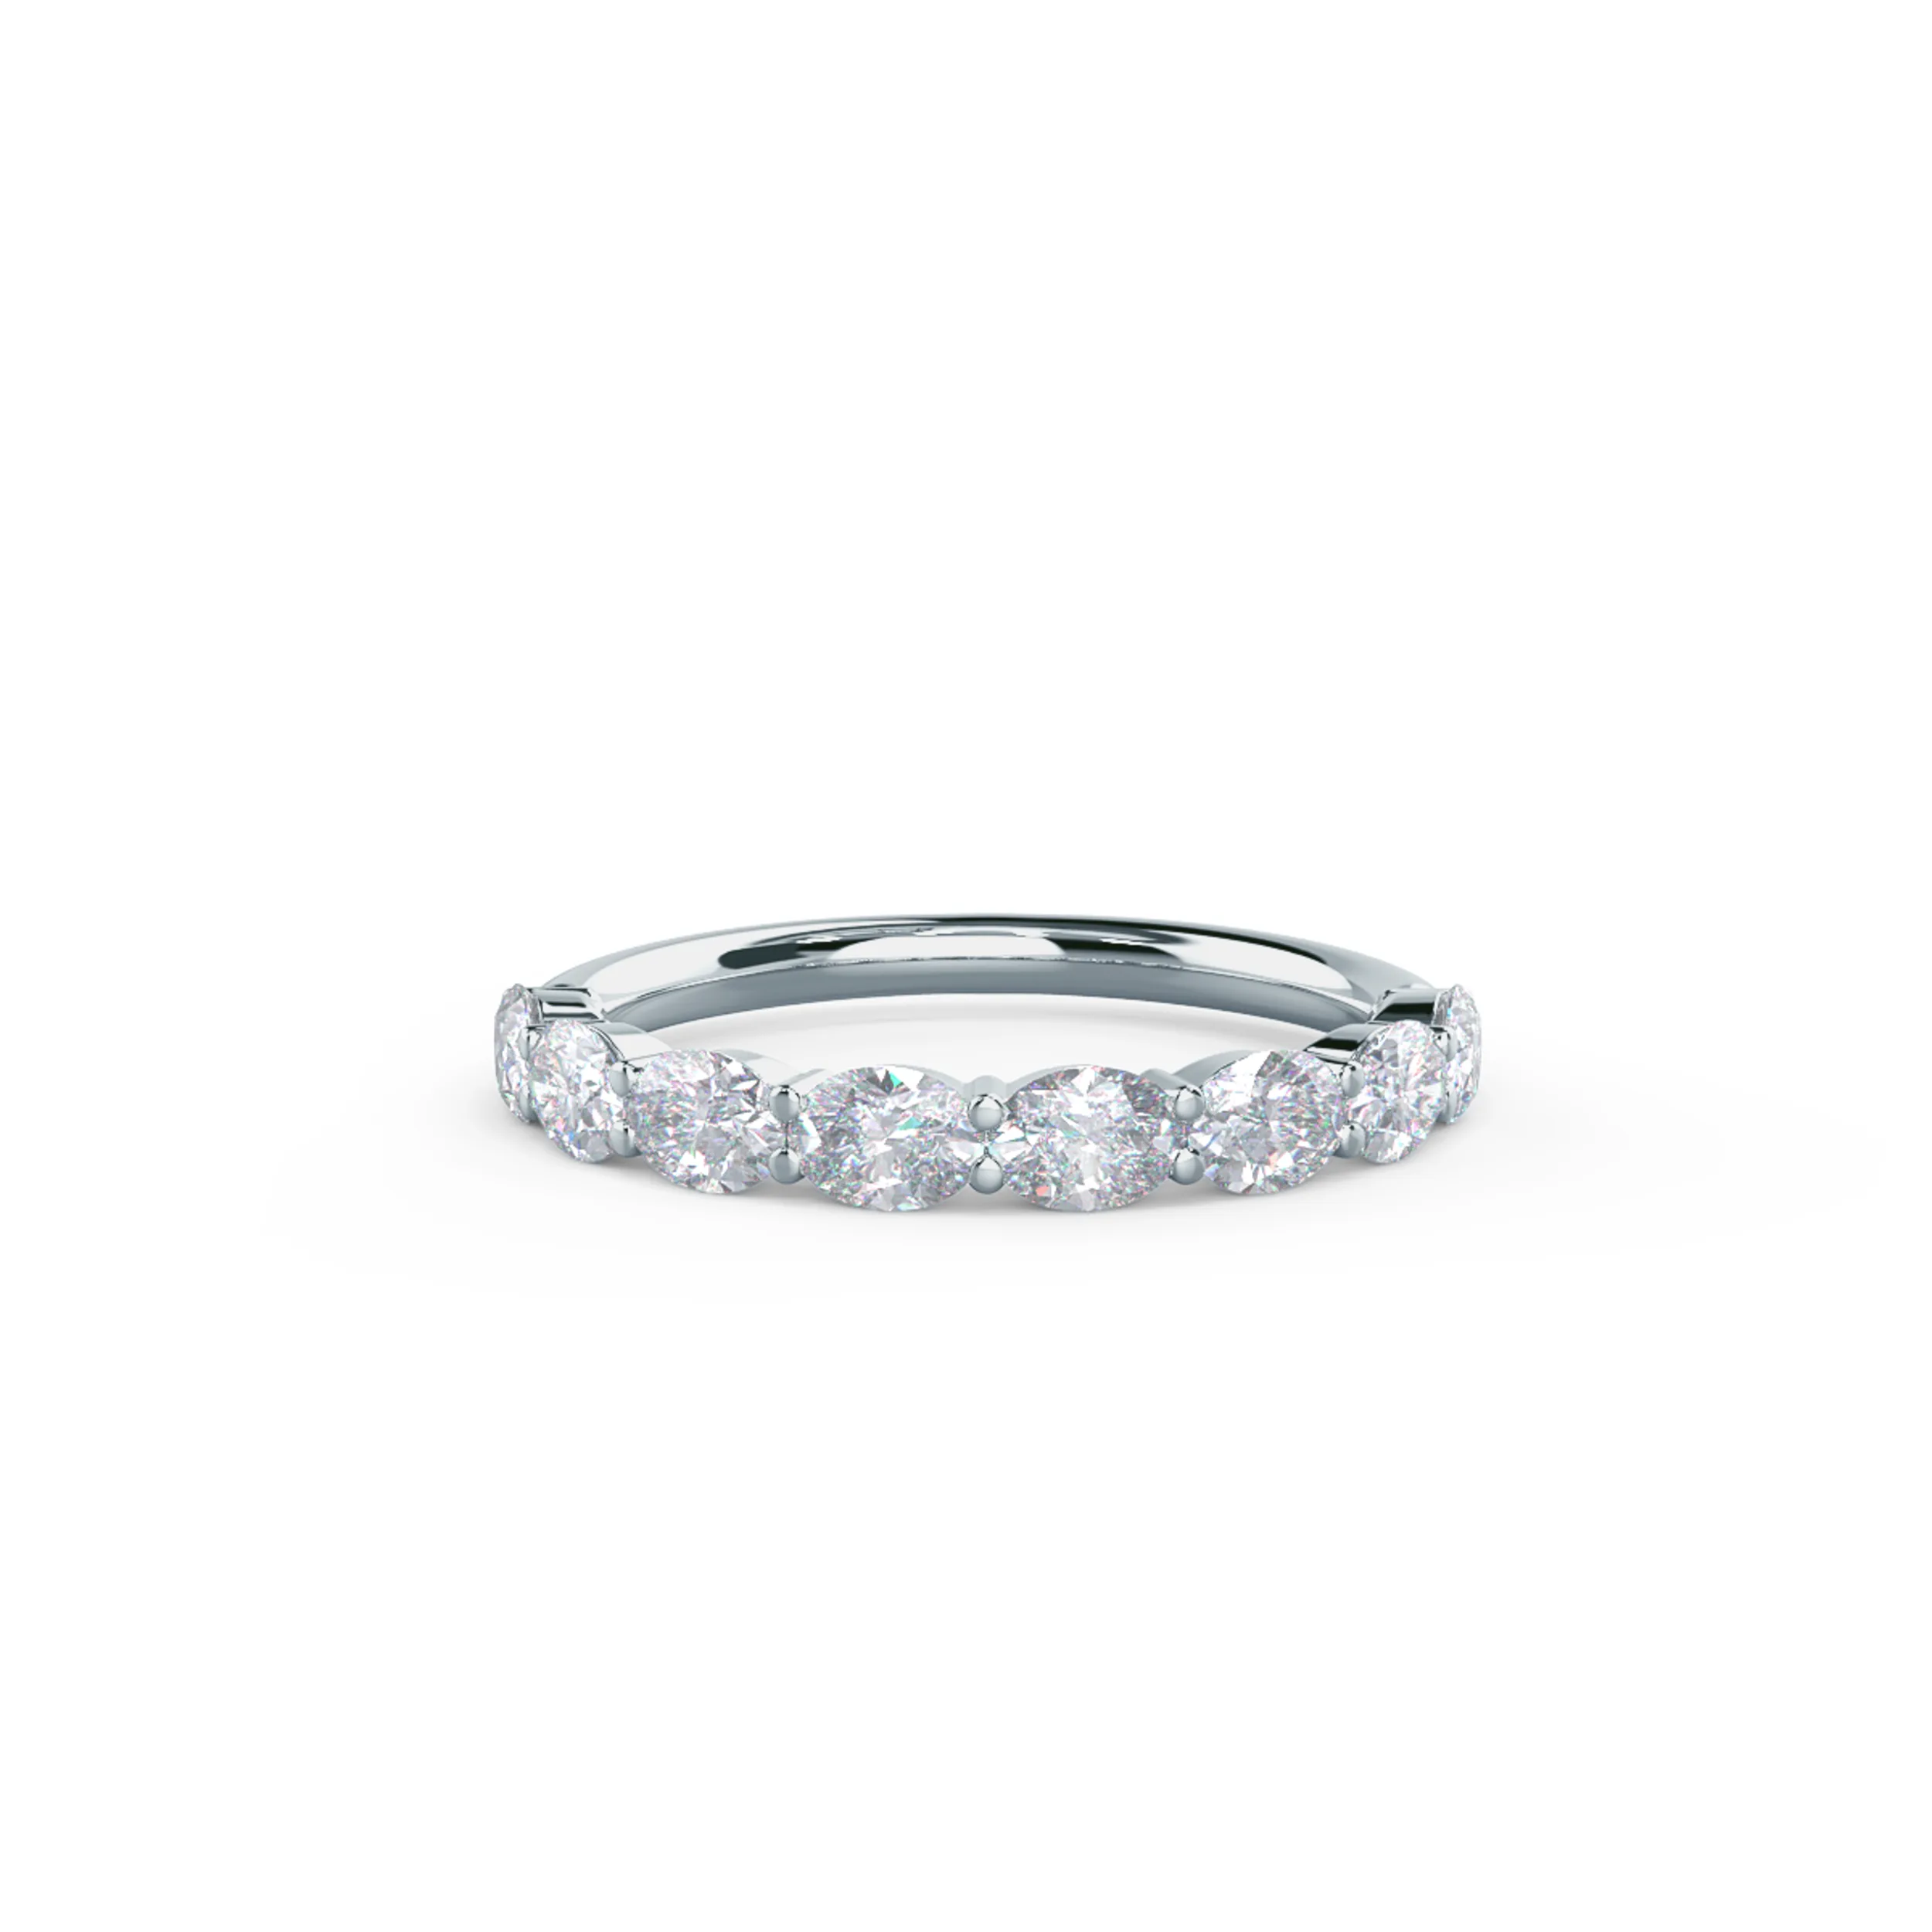 Exceptional Quality 0.8 ct Man Made Diamonds set in 18 Karat White Gold Oval East-West Half Band (Main View)